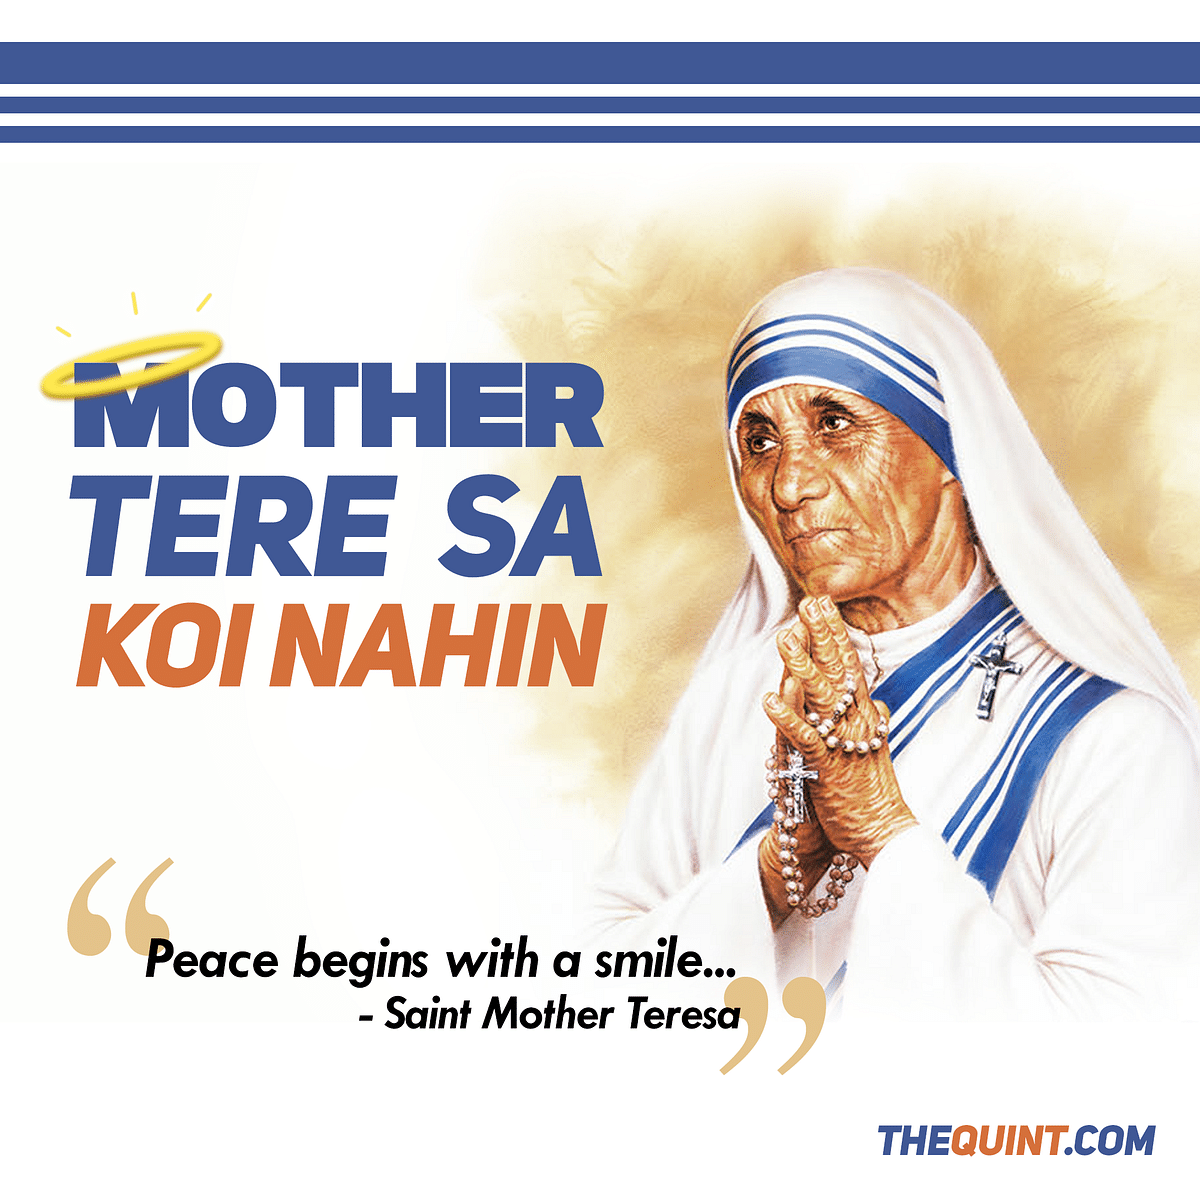 Mother Teresa is now Saint Teresa of Calcutta. Here’s our tribute.